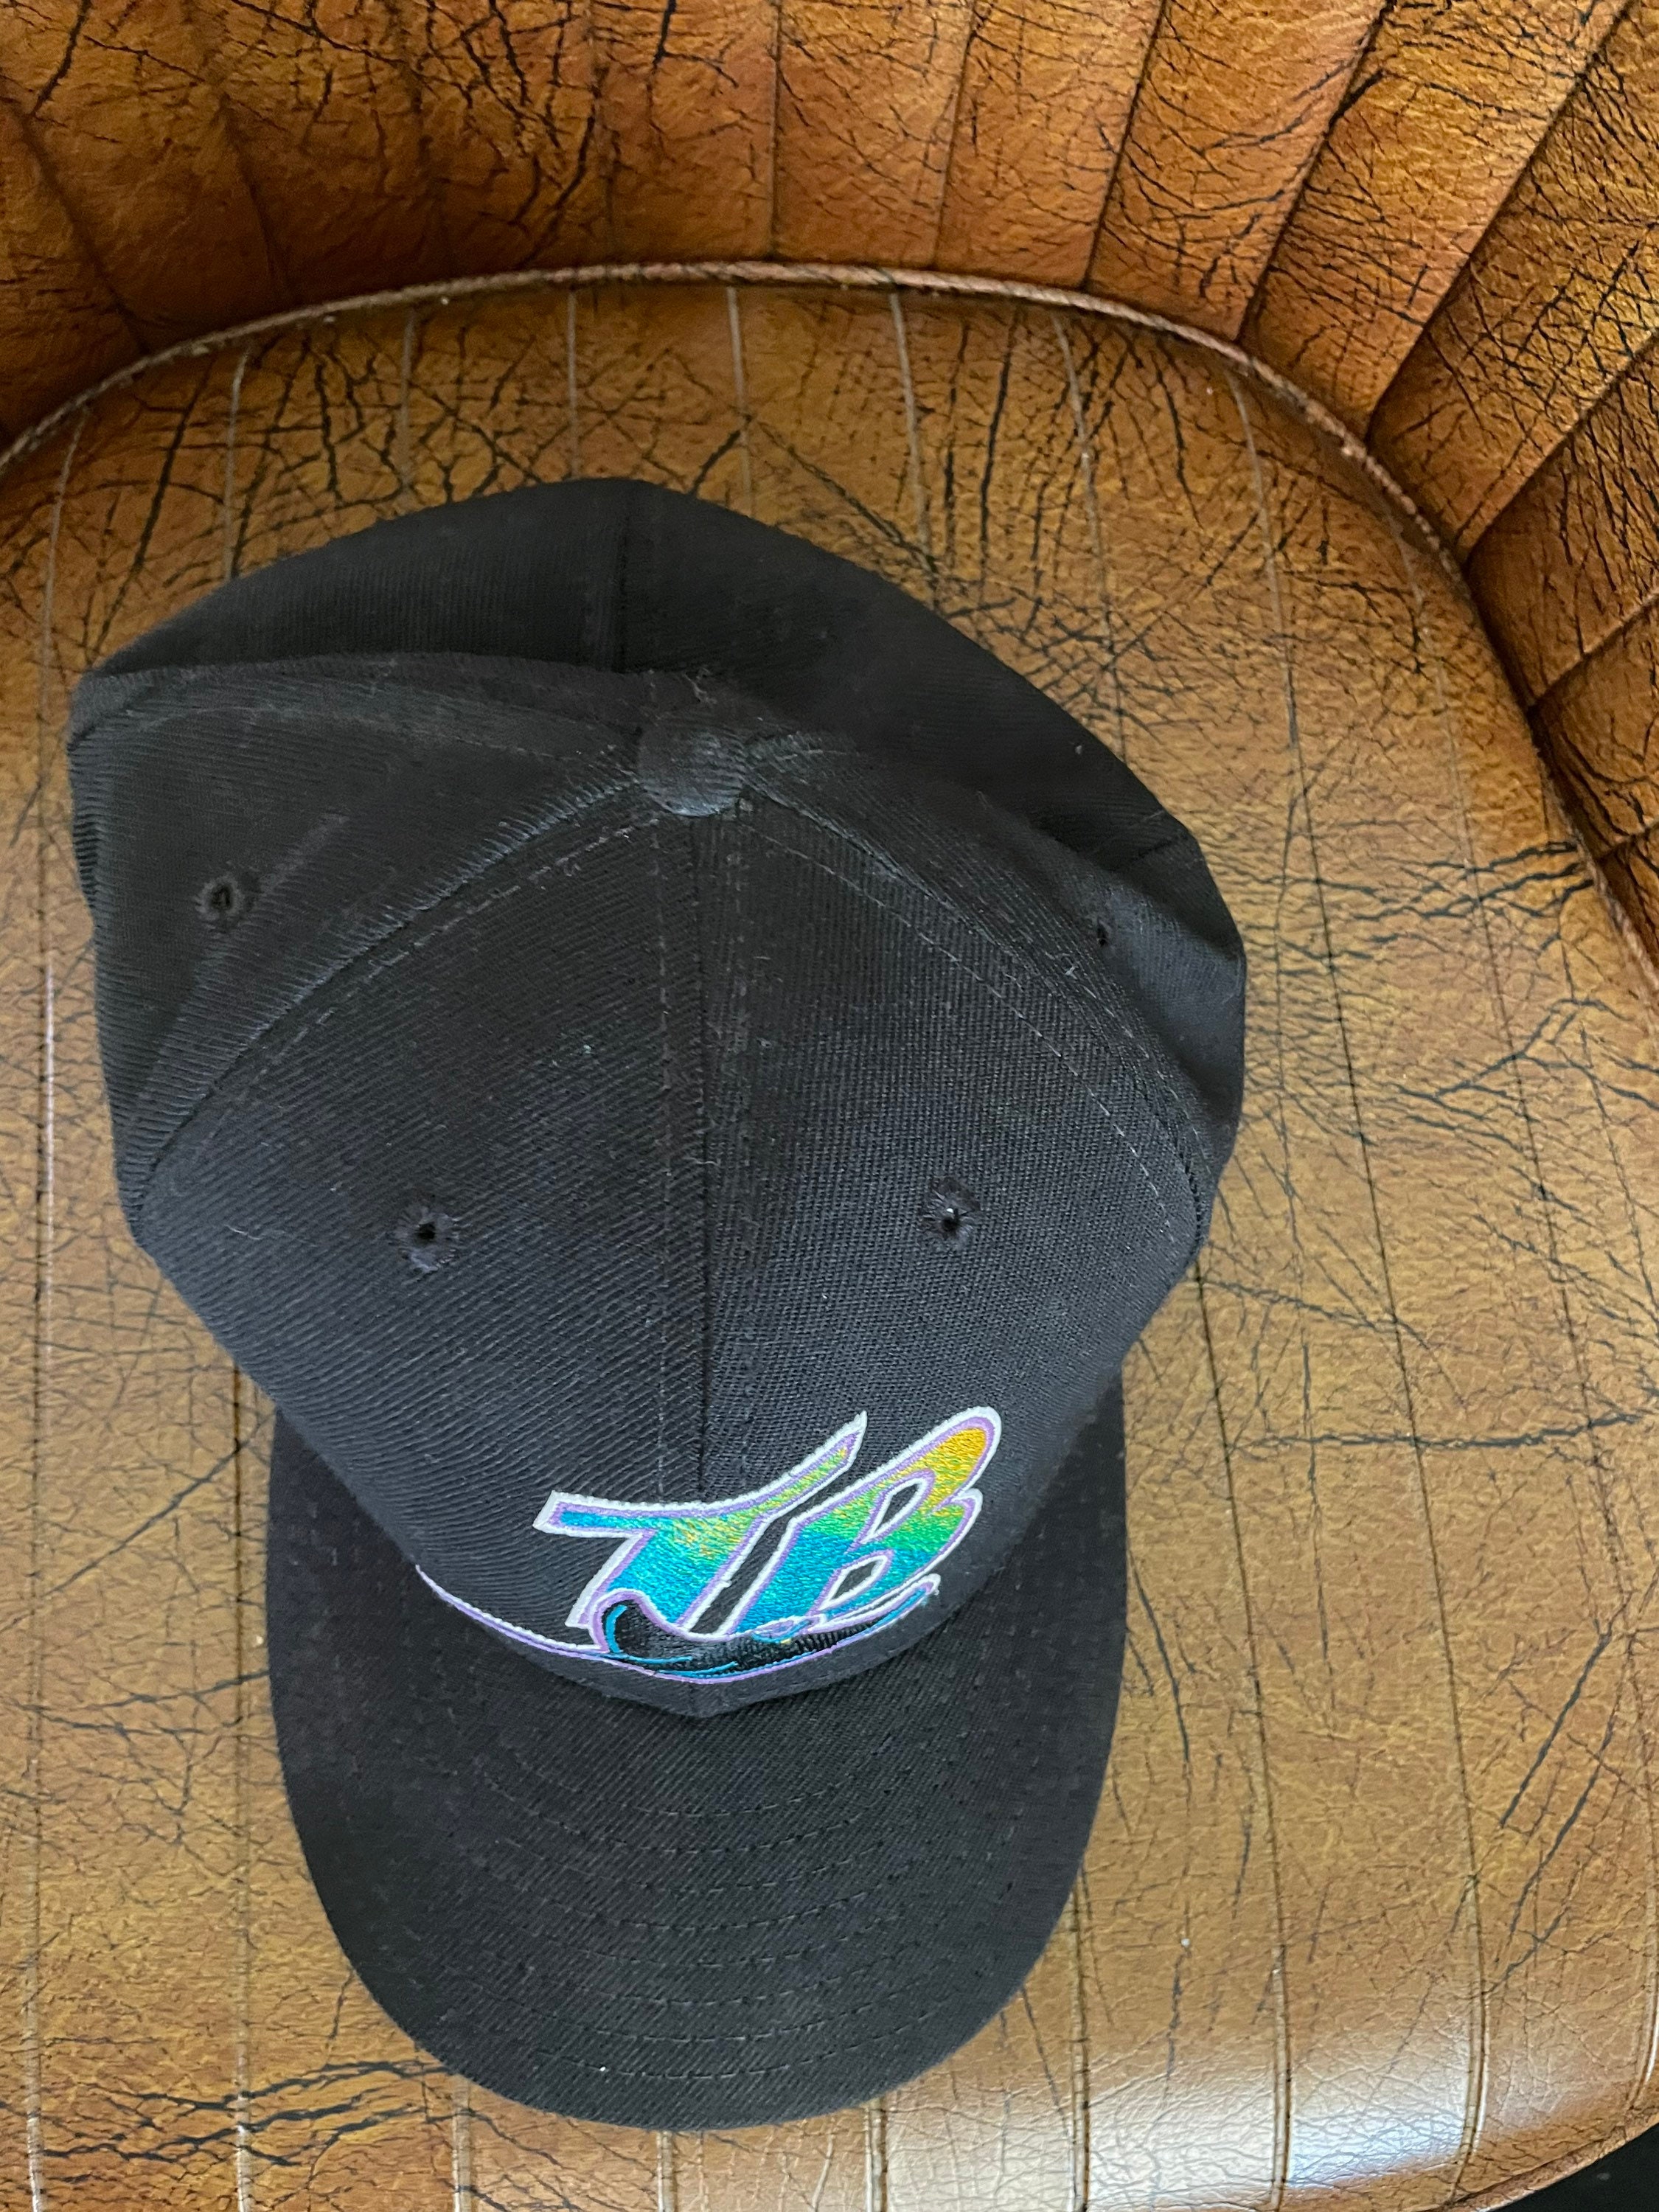 Price Reduced! True Vintage MLB Tampa Bay Devil Rays New Era 59/50 Pro Model Made in The USA Wool 7 5/8 Fitted Black Baseball Hat